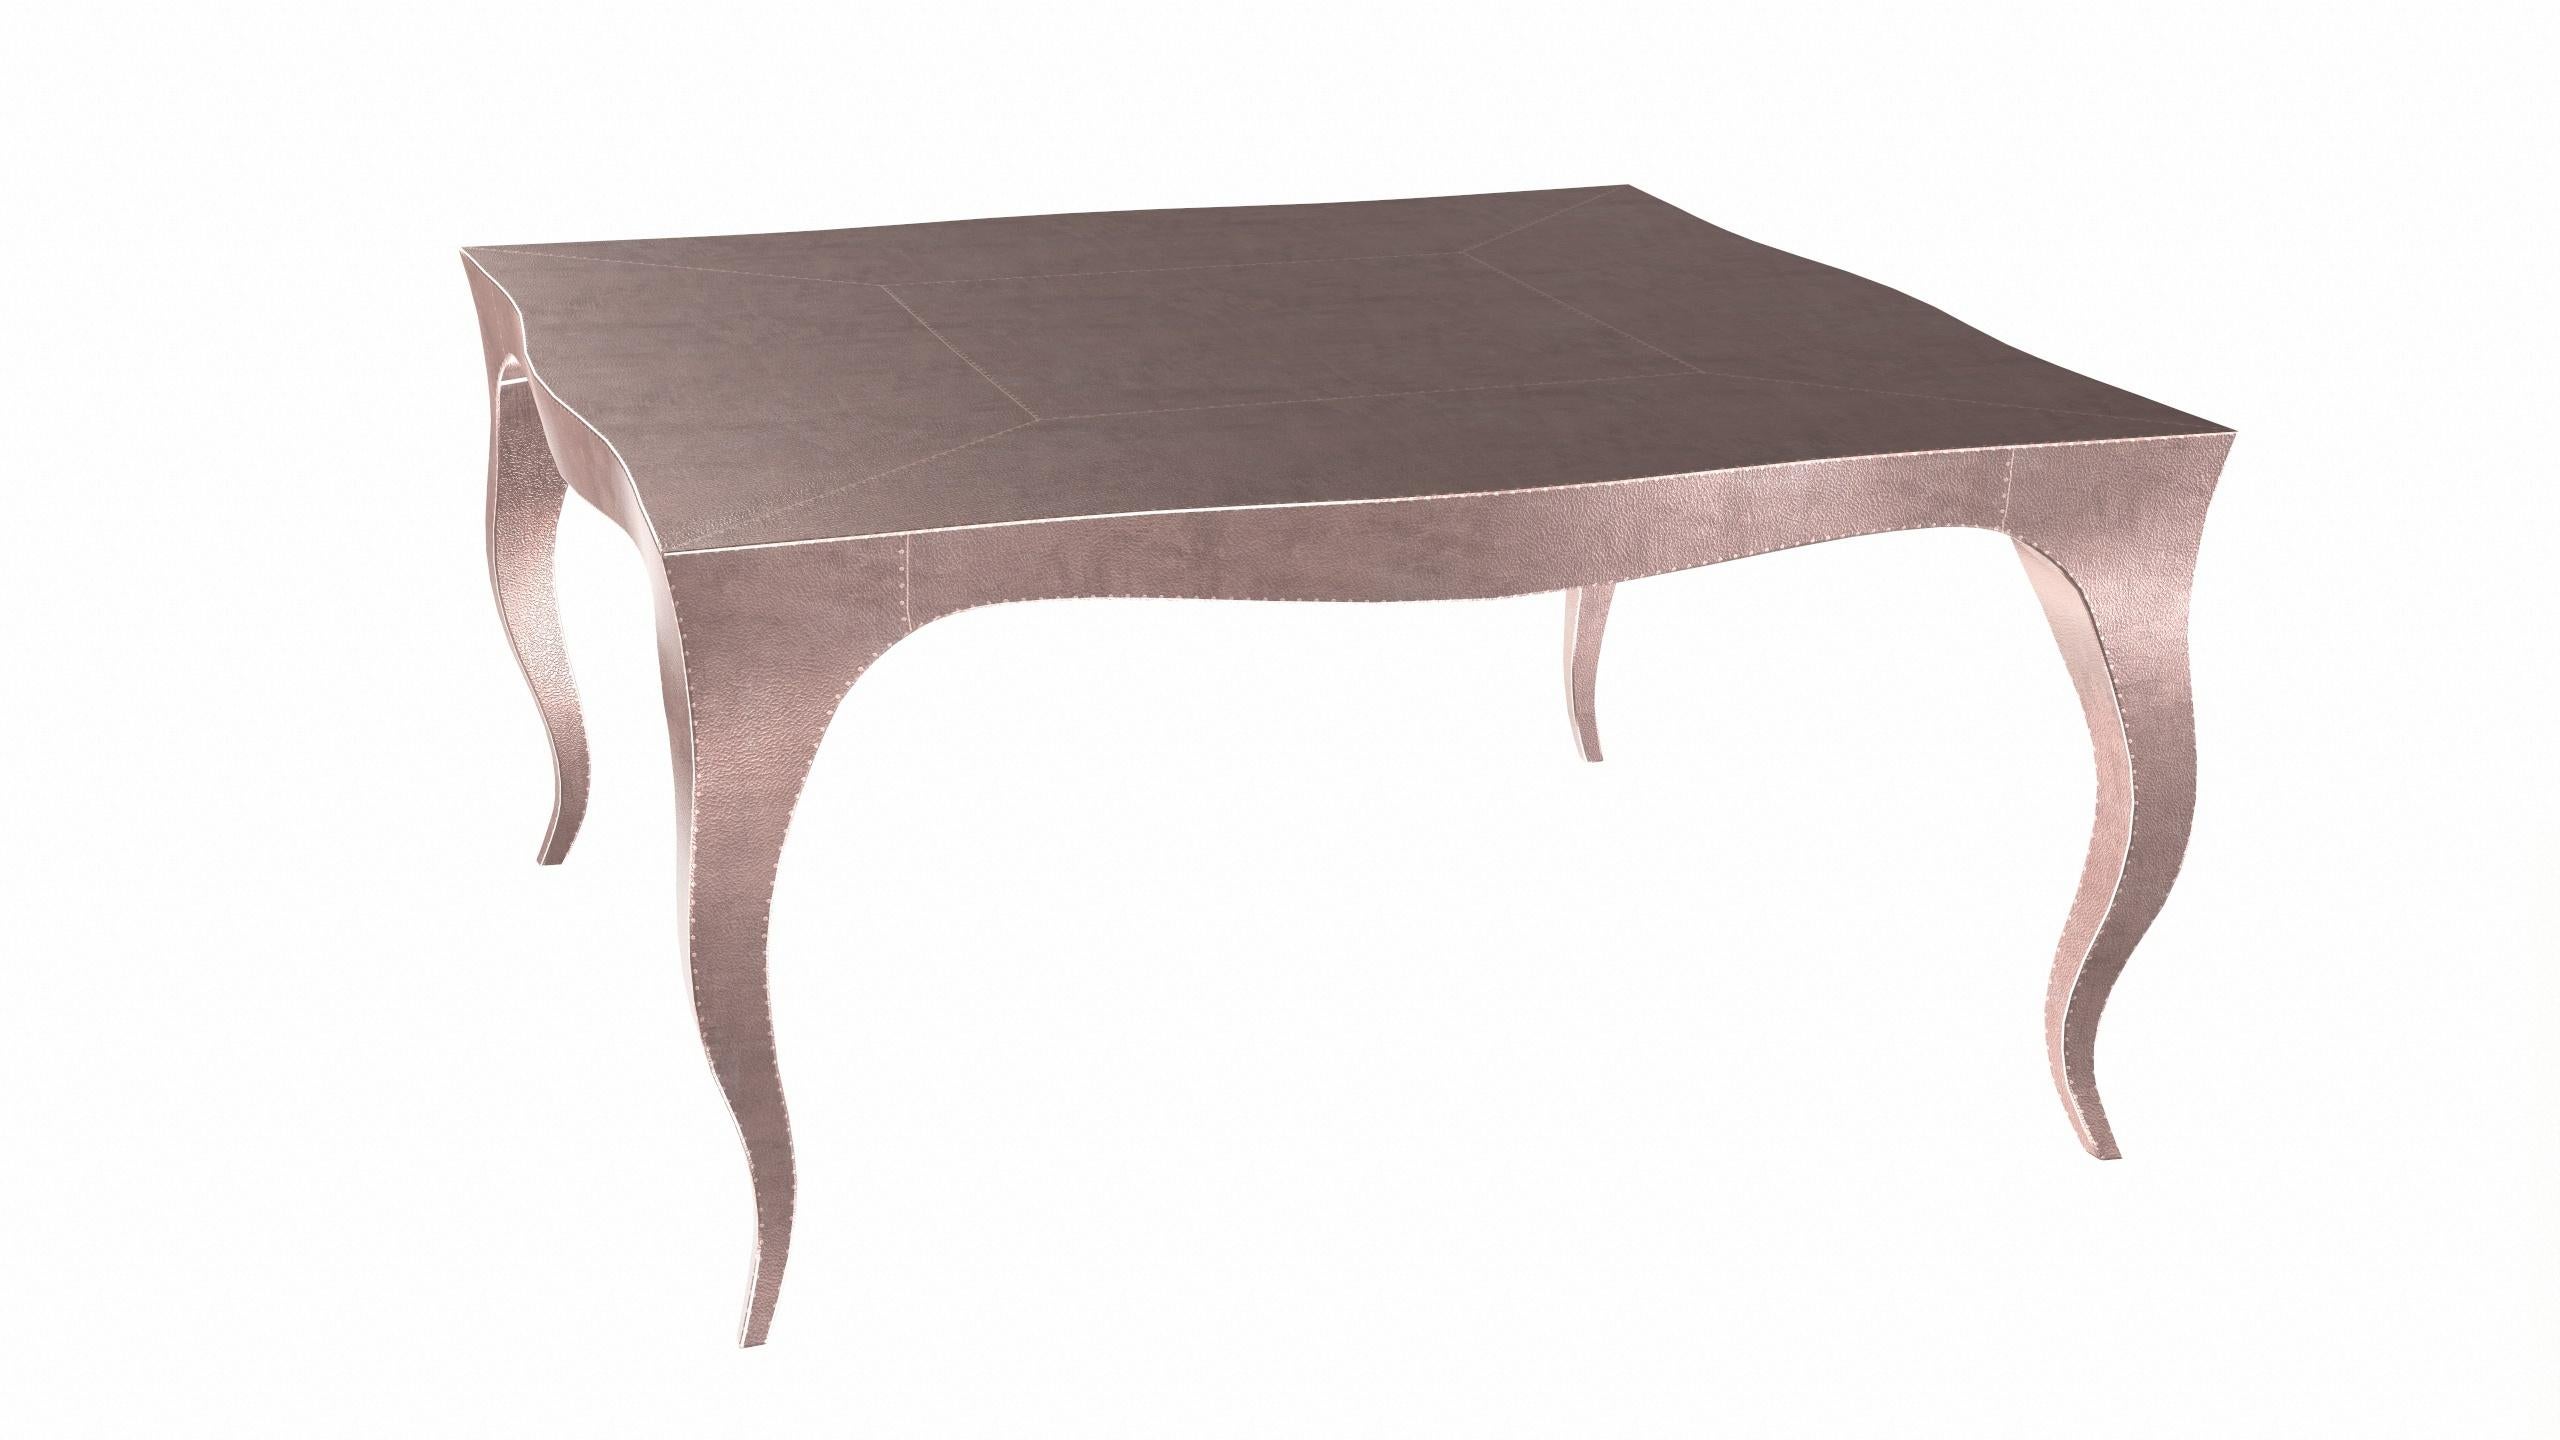 Metal Louise Art Deco Center Tables Fine Hammered Copper by Paul Mathieu for S.Odegard For Sale